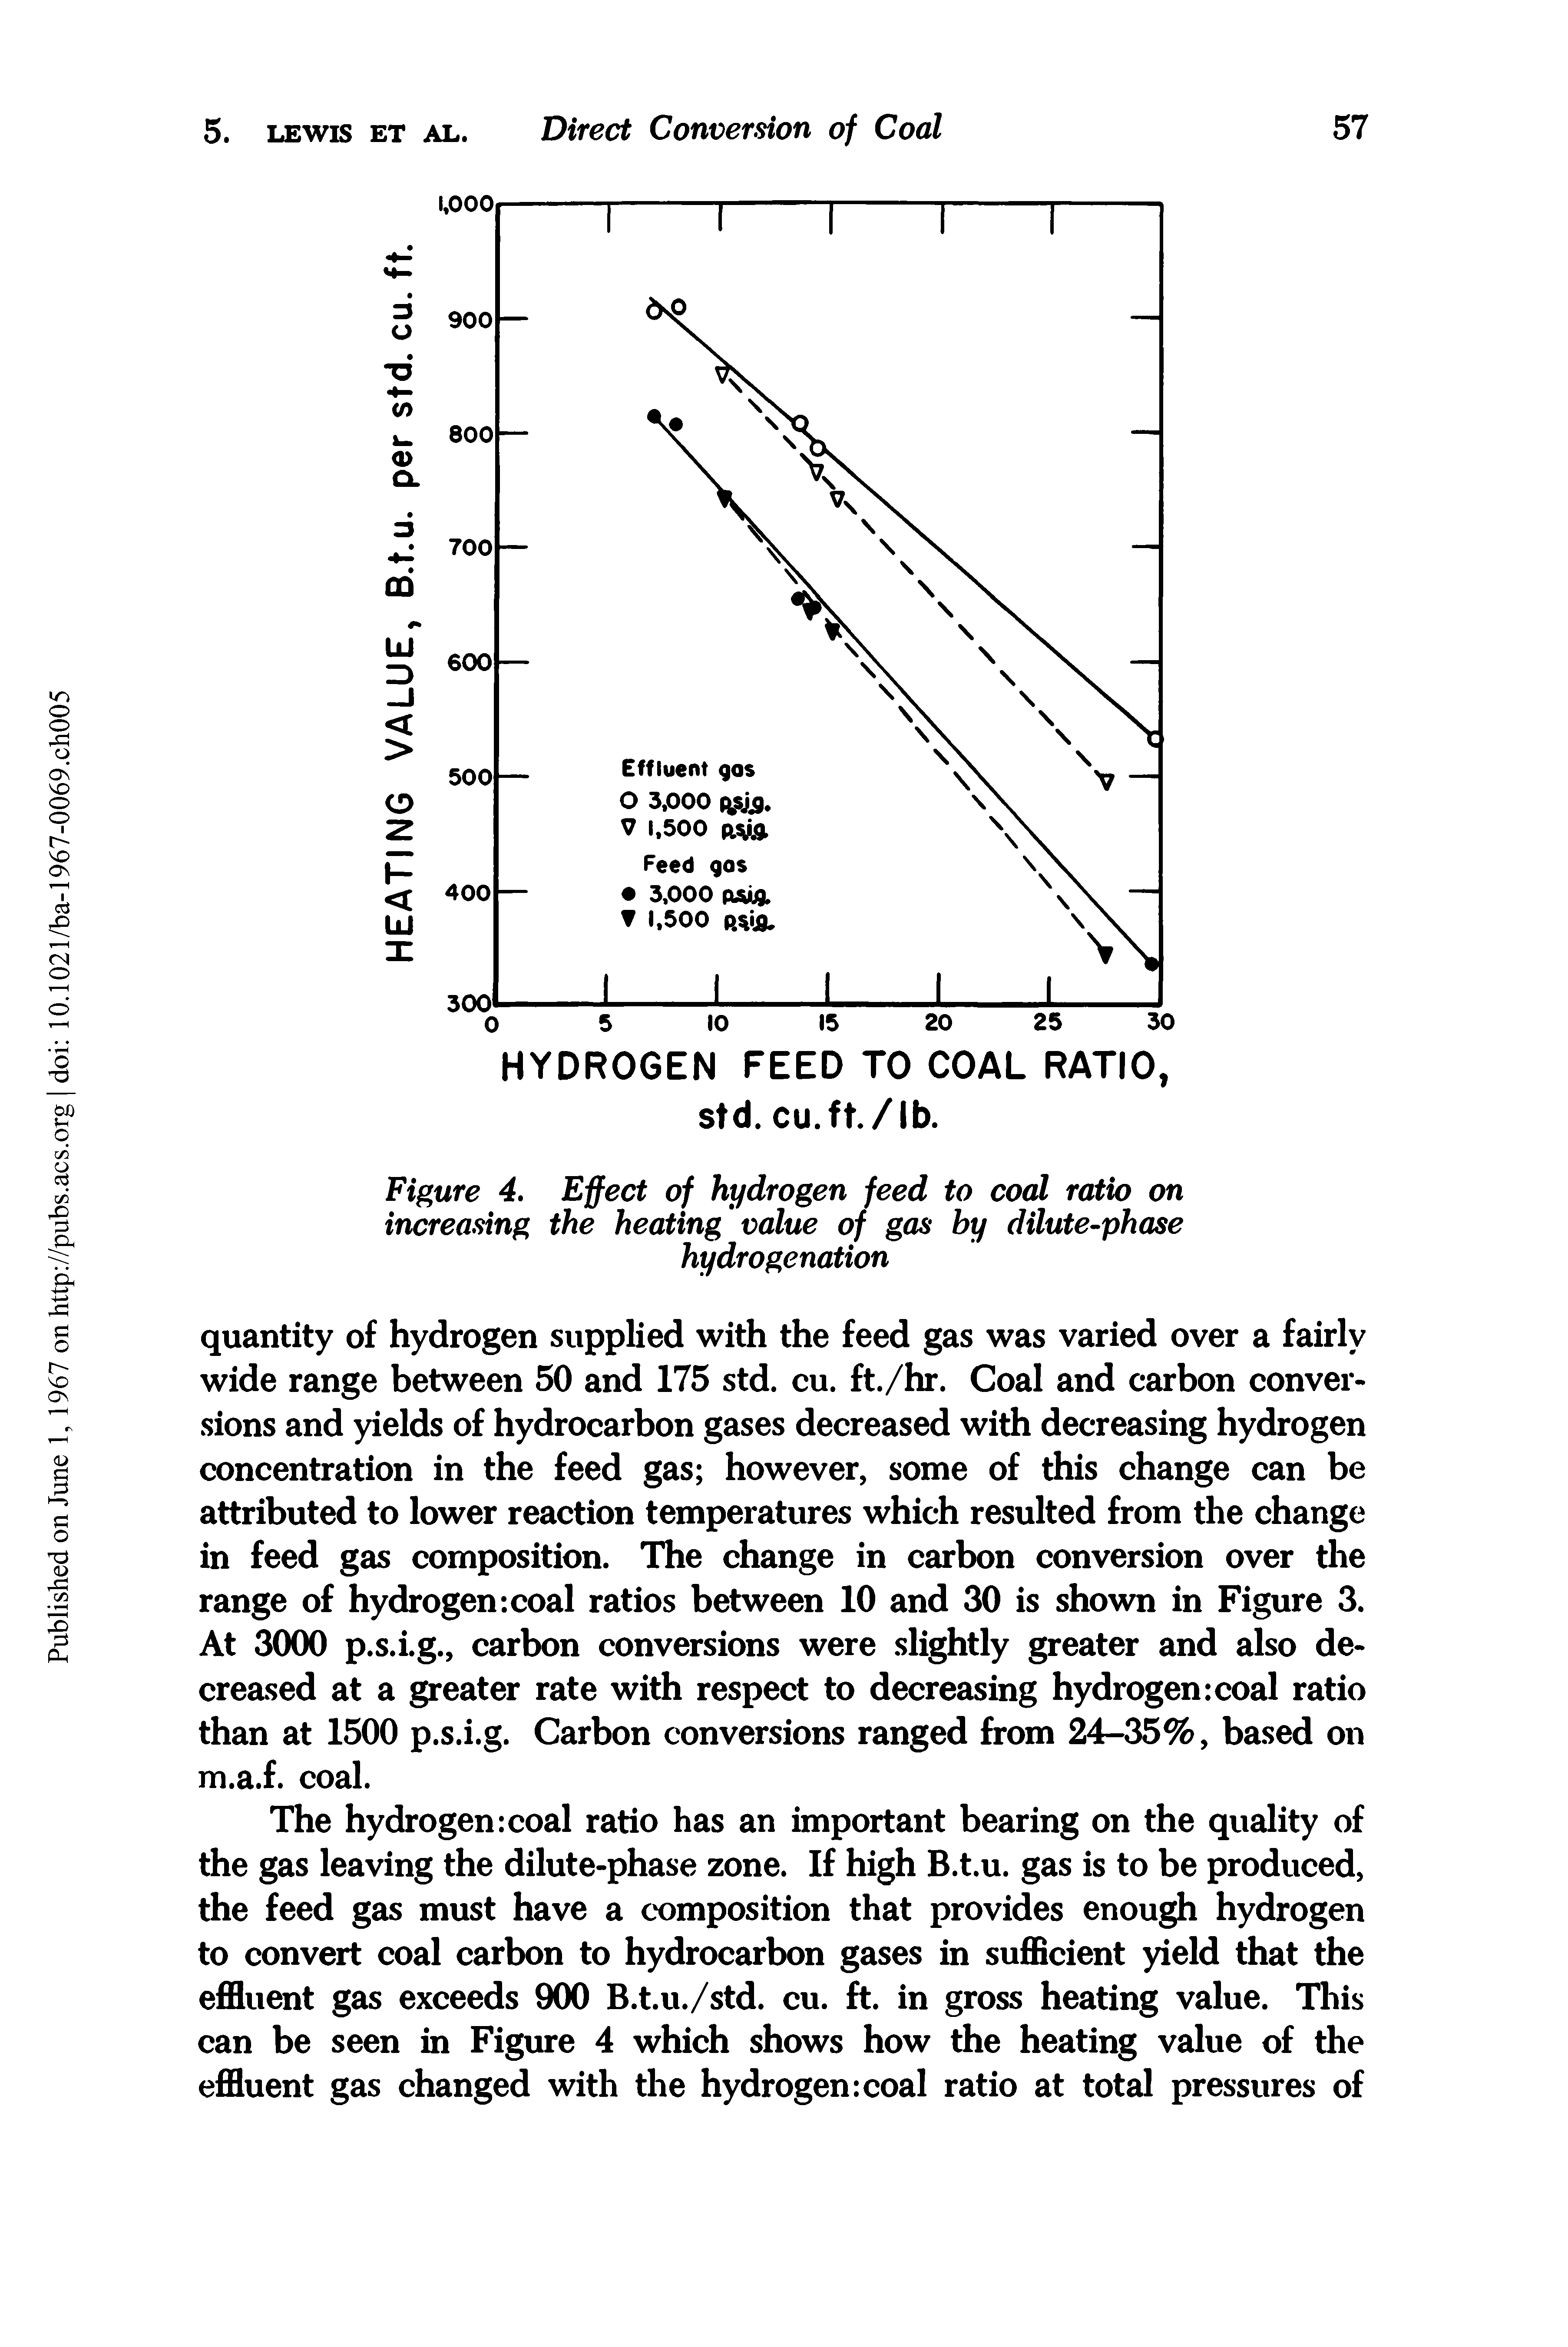 Figure 4. Effect of hydrogen feed to coal ratio on increasing the heating value of gas by dilute-phase hydrogenation...